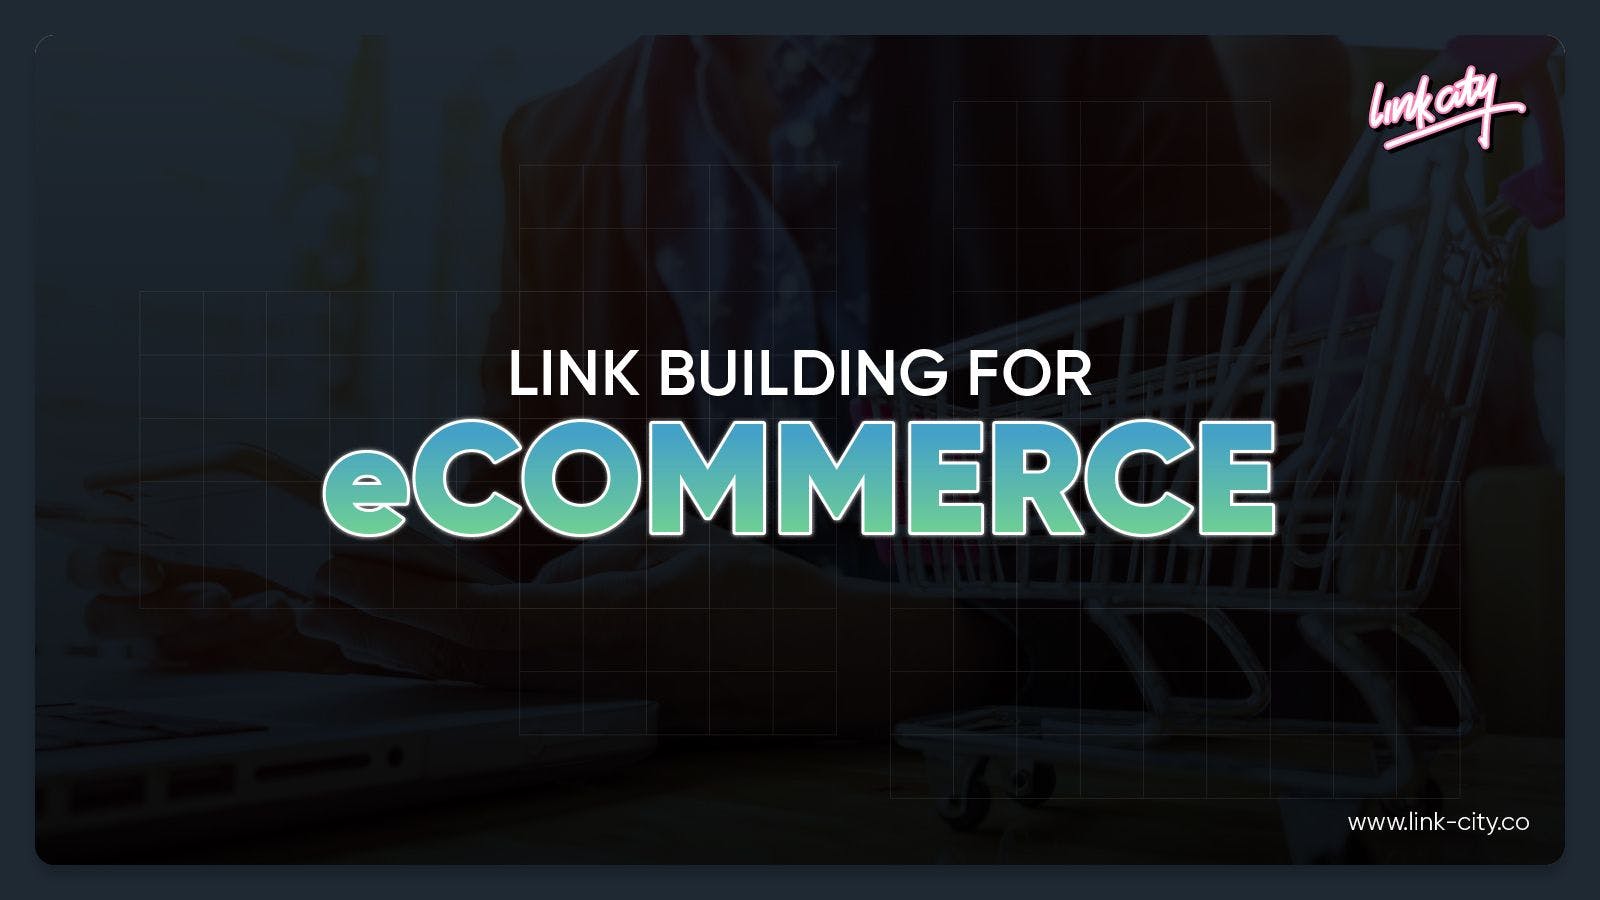 Link Building For eCommerce